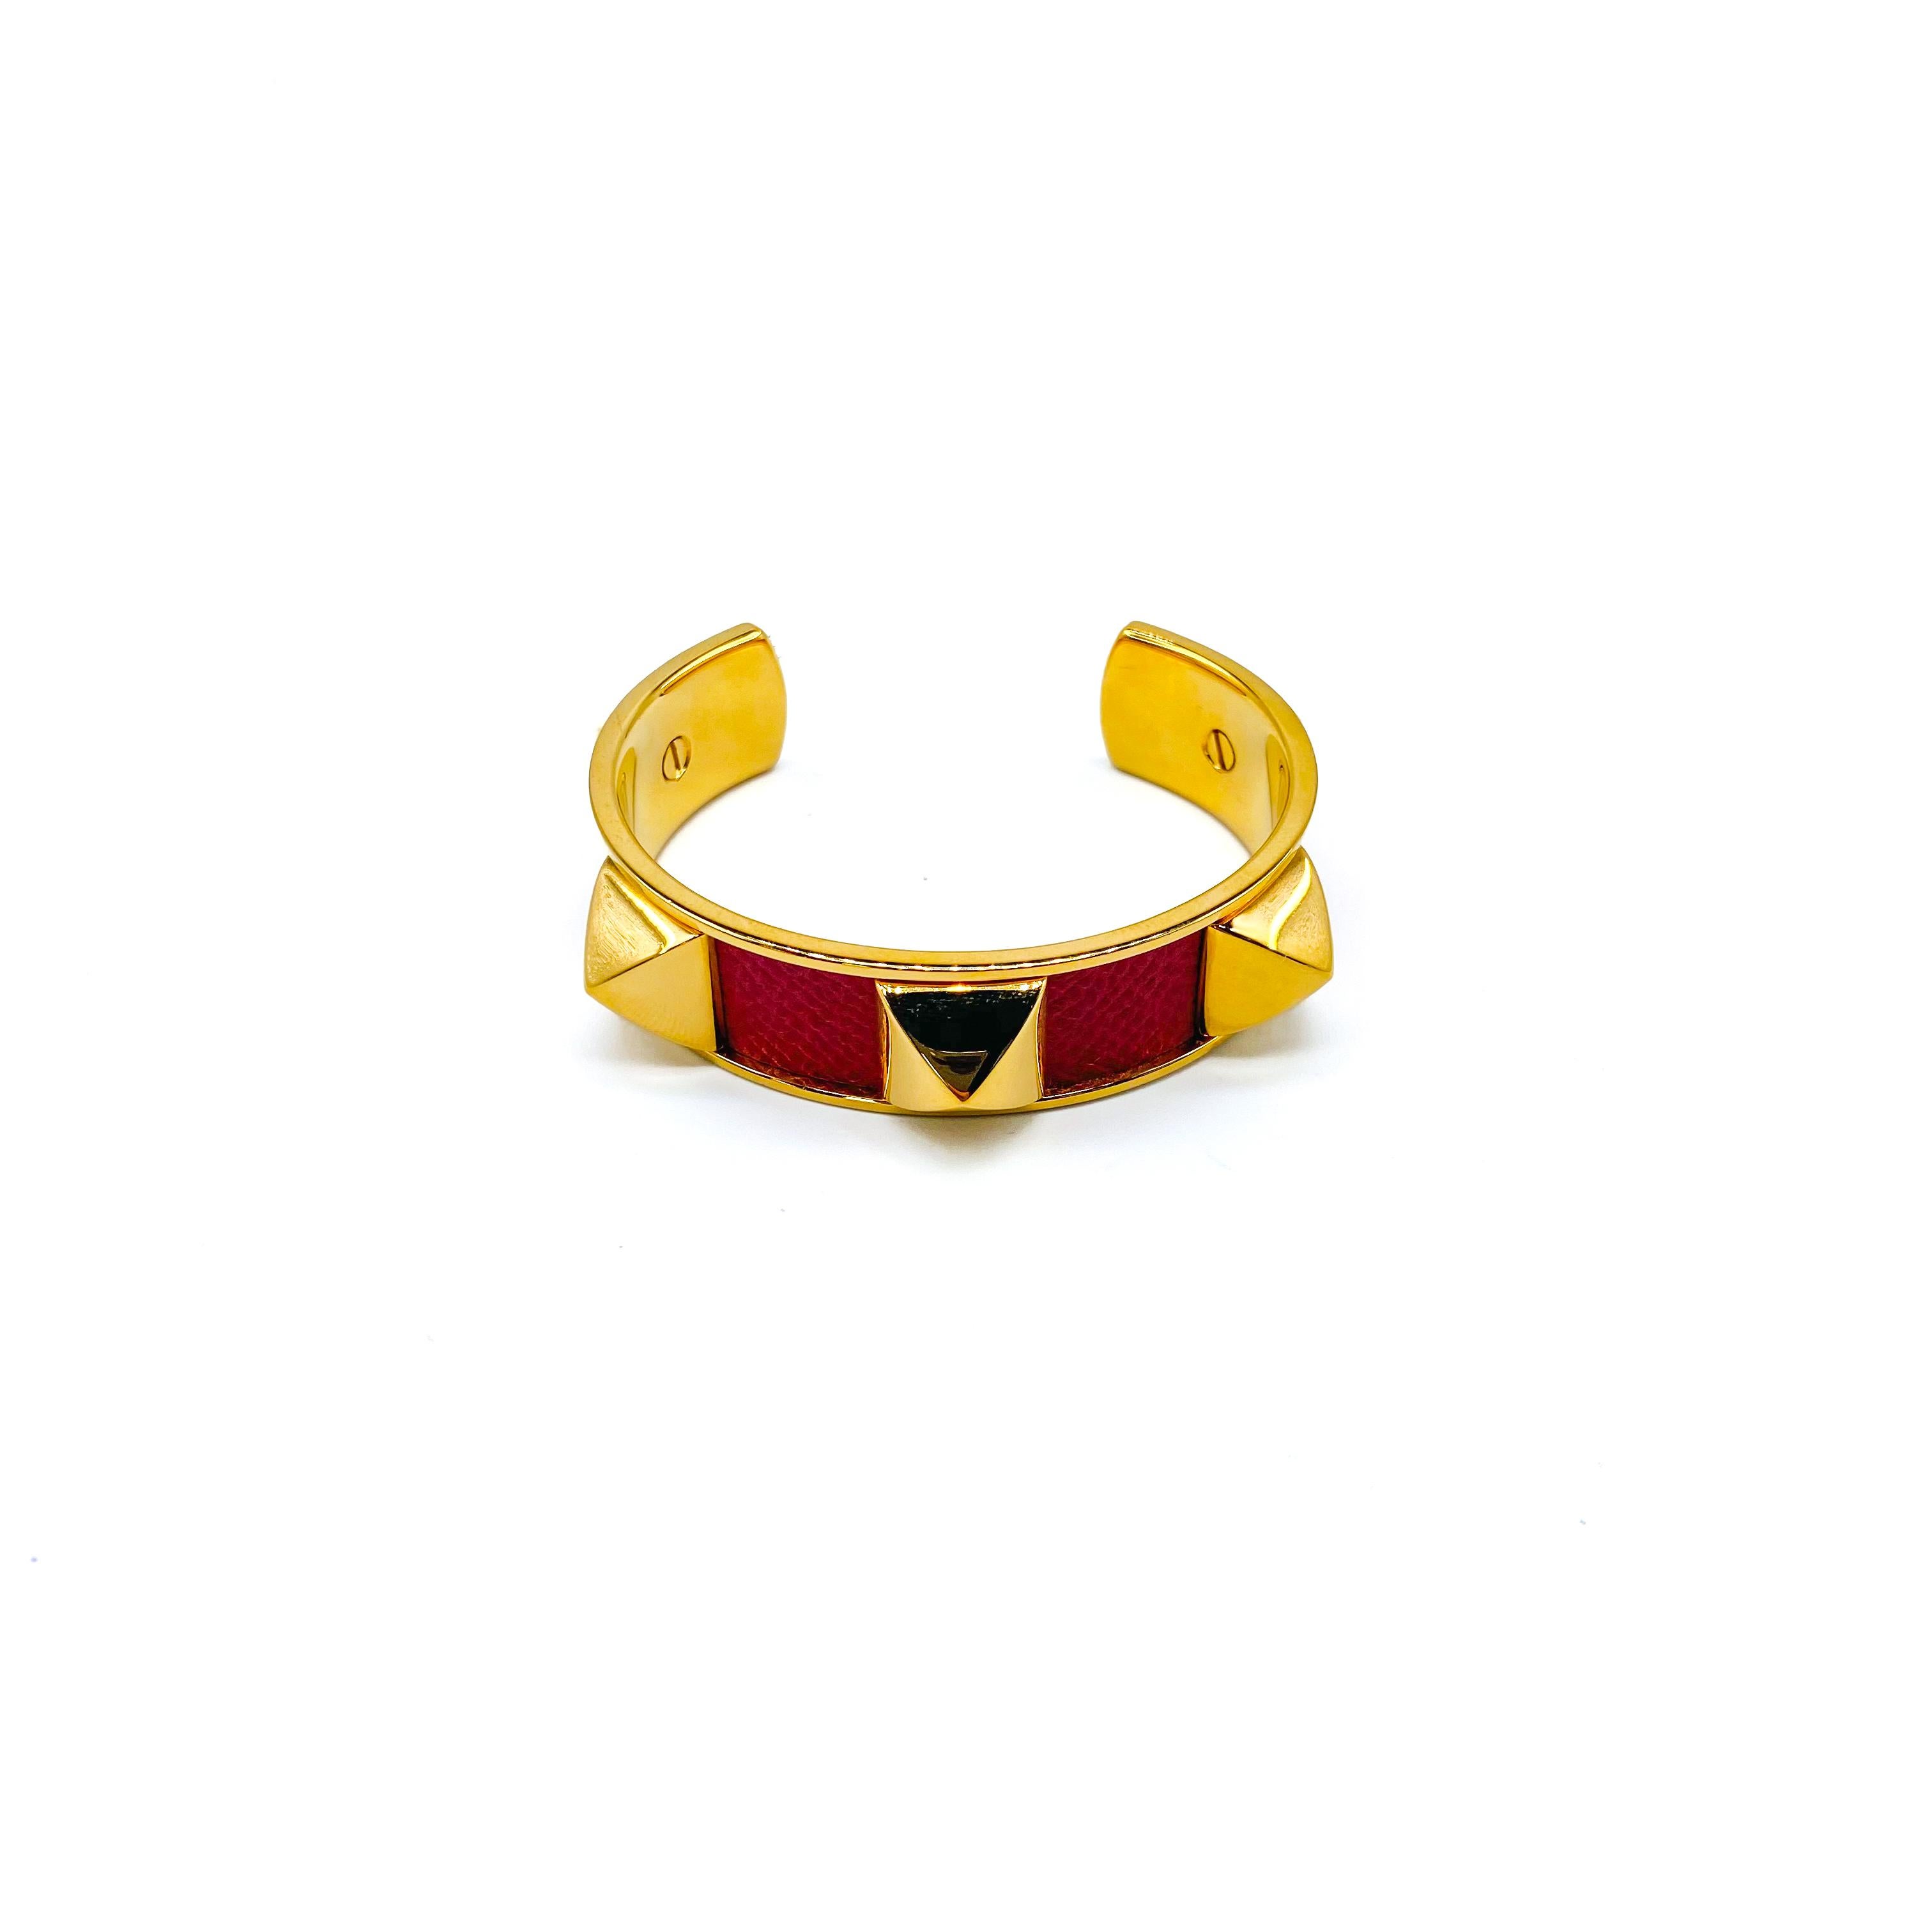 Hermes Medor Vintage Studded Bracelet

Incredible lizard leather studded bracelet from Hermes

Detail
-Made in France 
-Crafted from high quality red lizard leather and gold plated hardware
-Luxury vintage with a contemporary edge

Size &